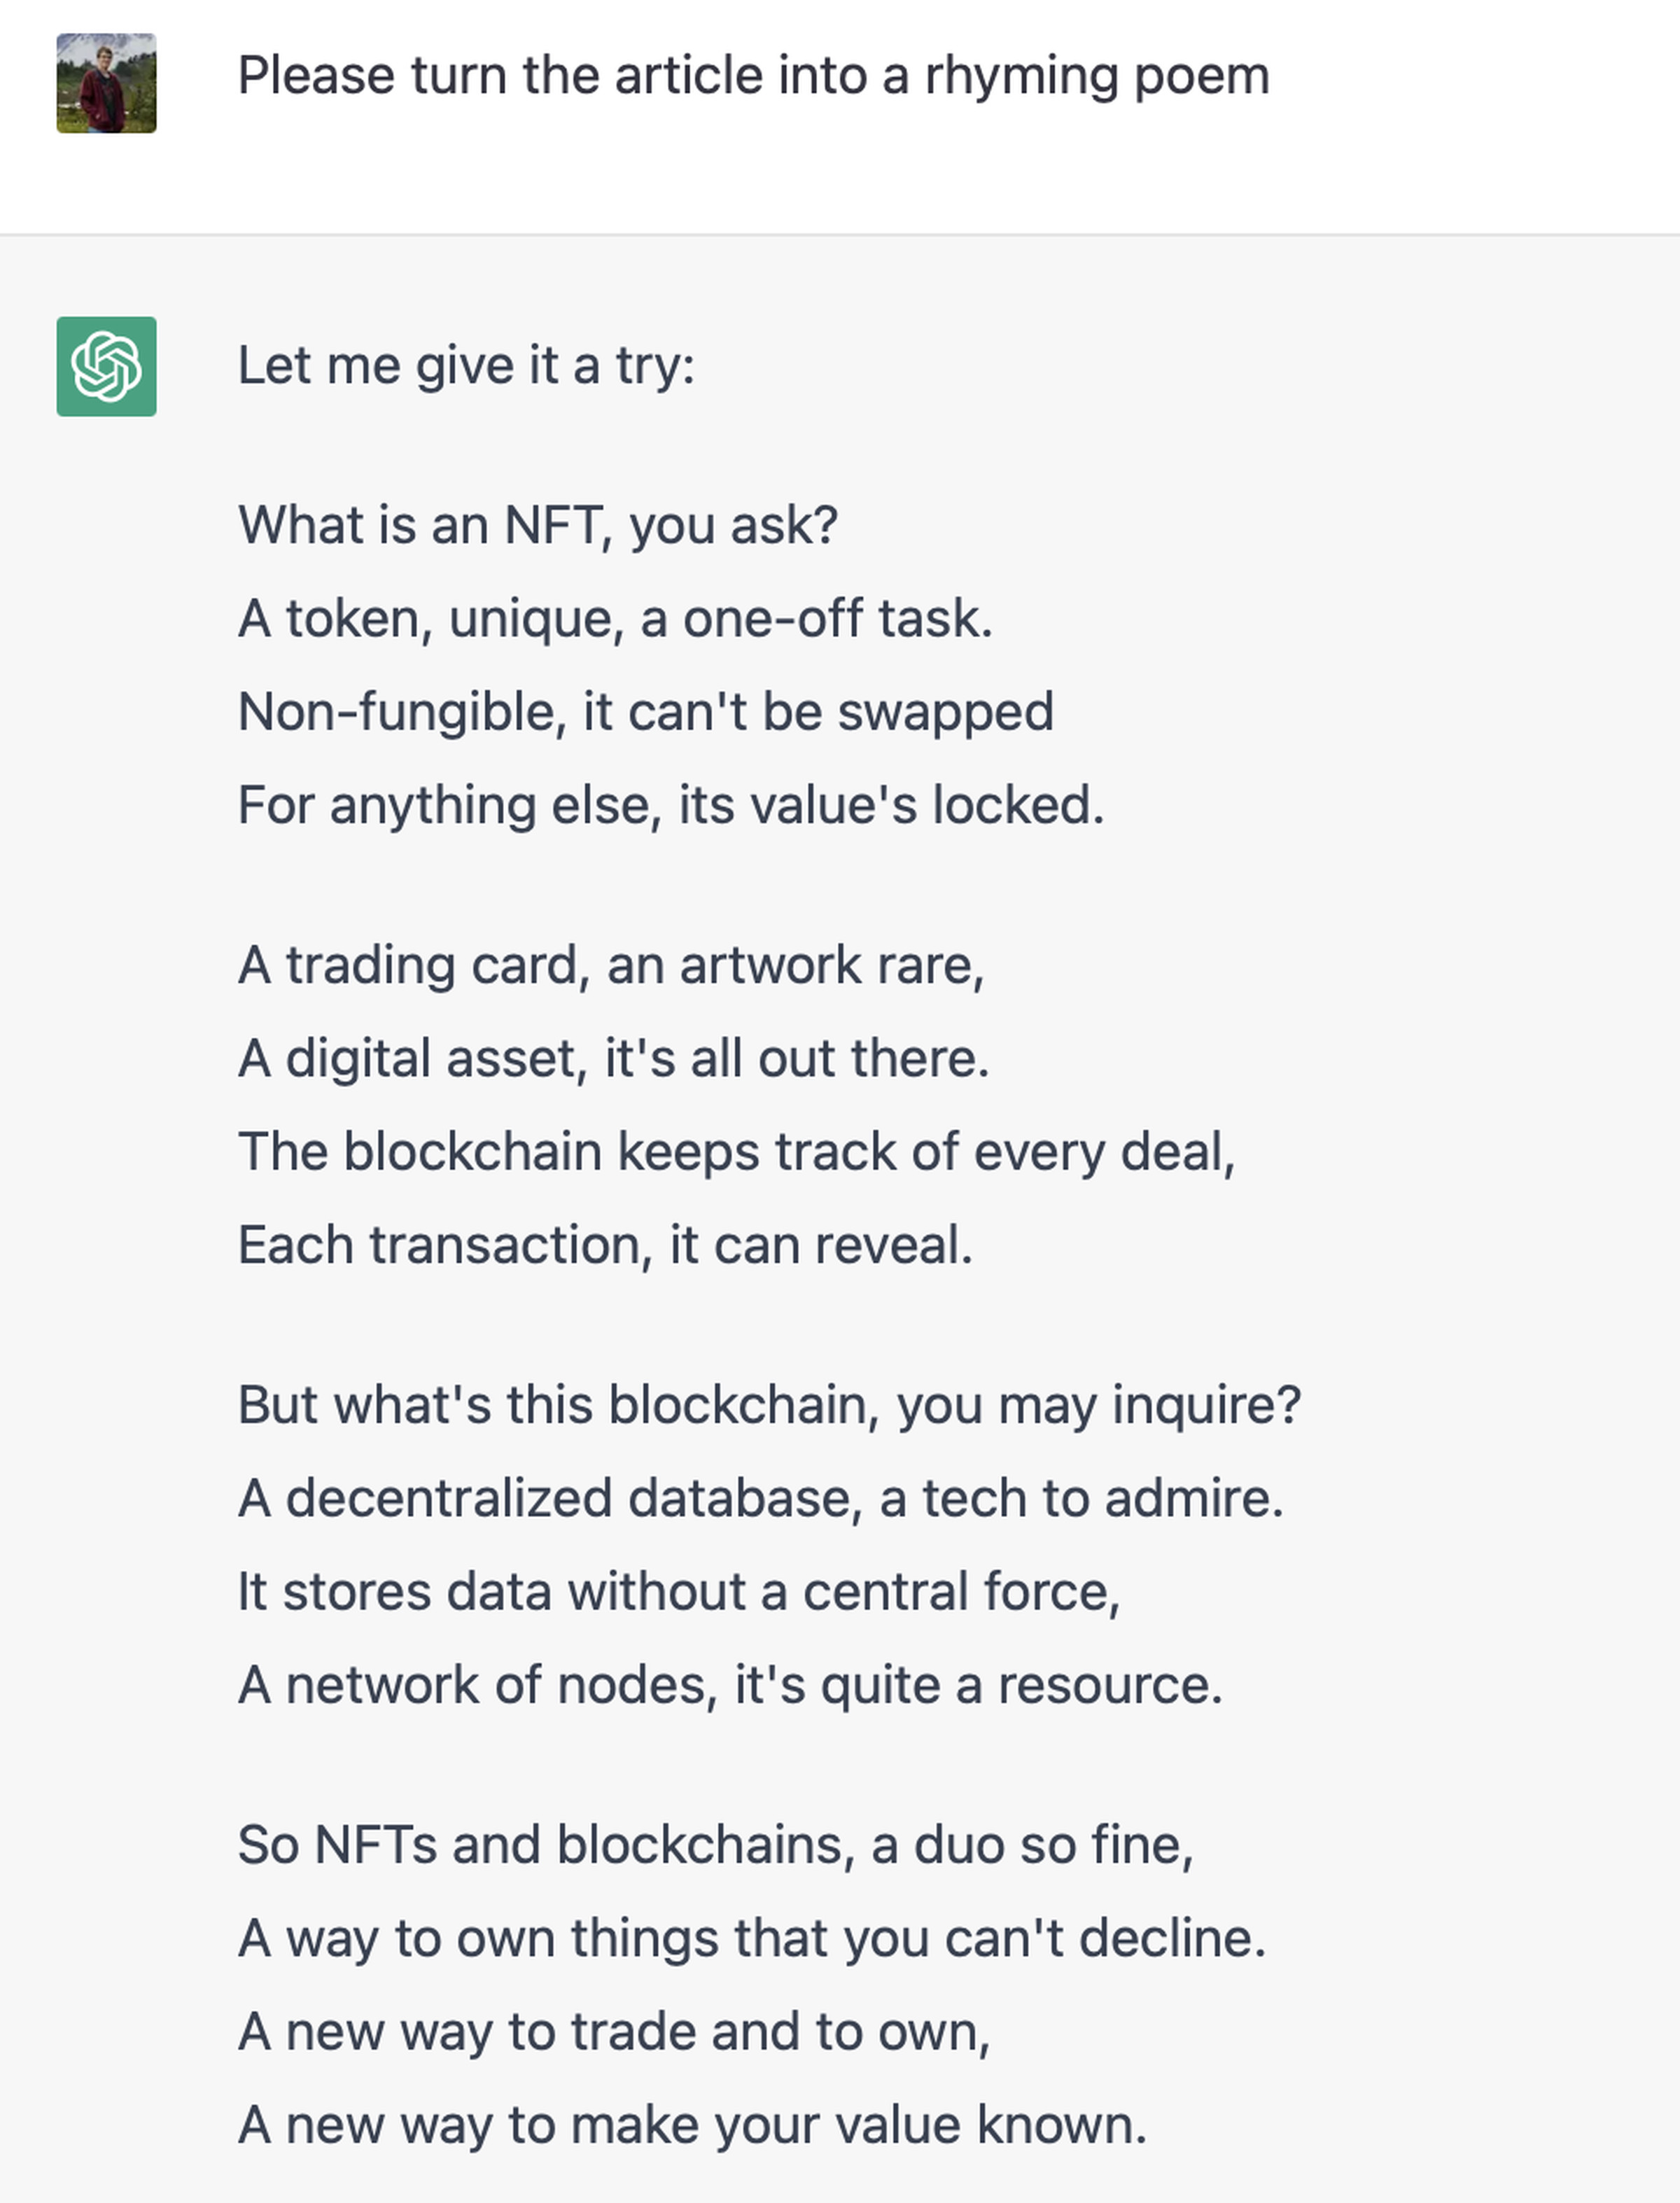 <em>GPT-3.5’s poem about NFTs — why did I do this to myself?</em>